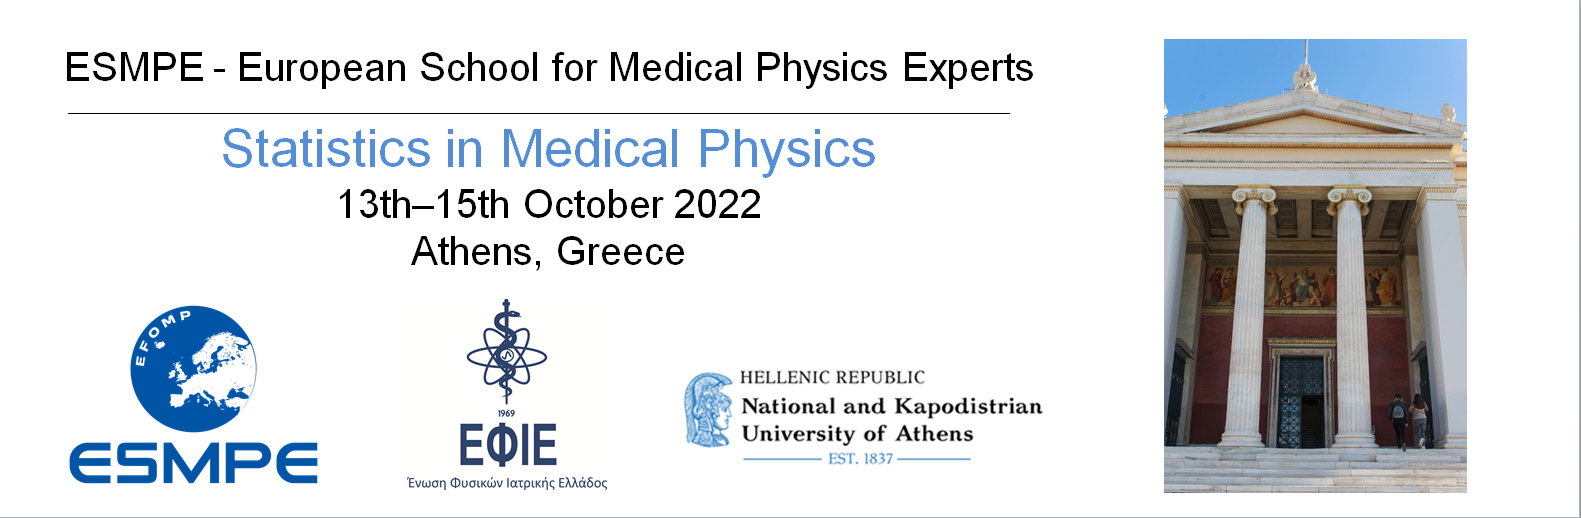 European School for Medical Physics Experts - Autumn edition 